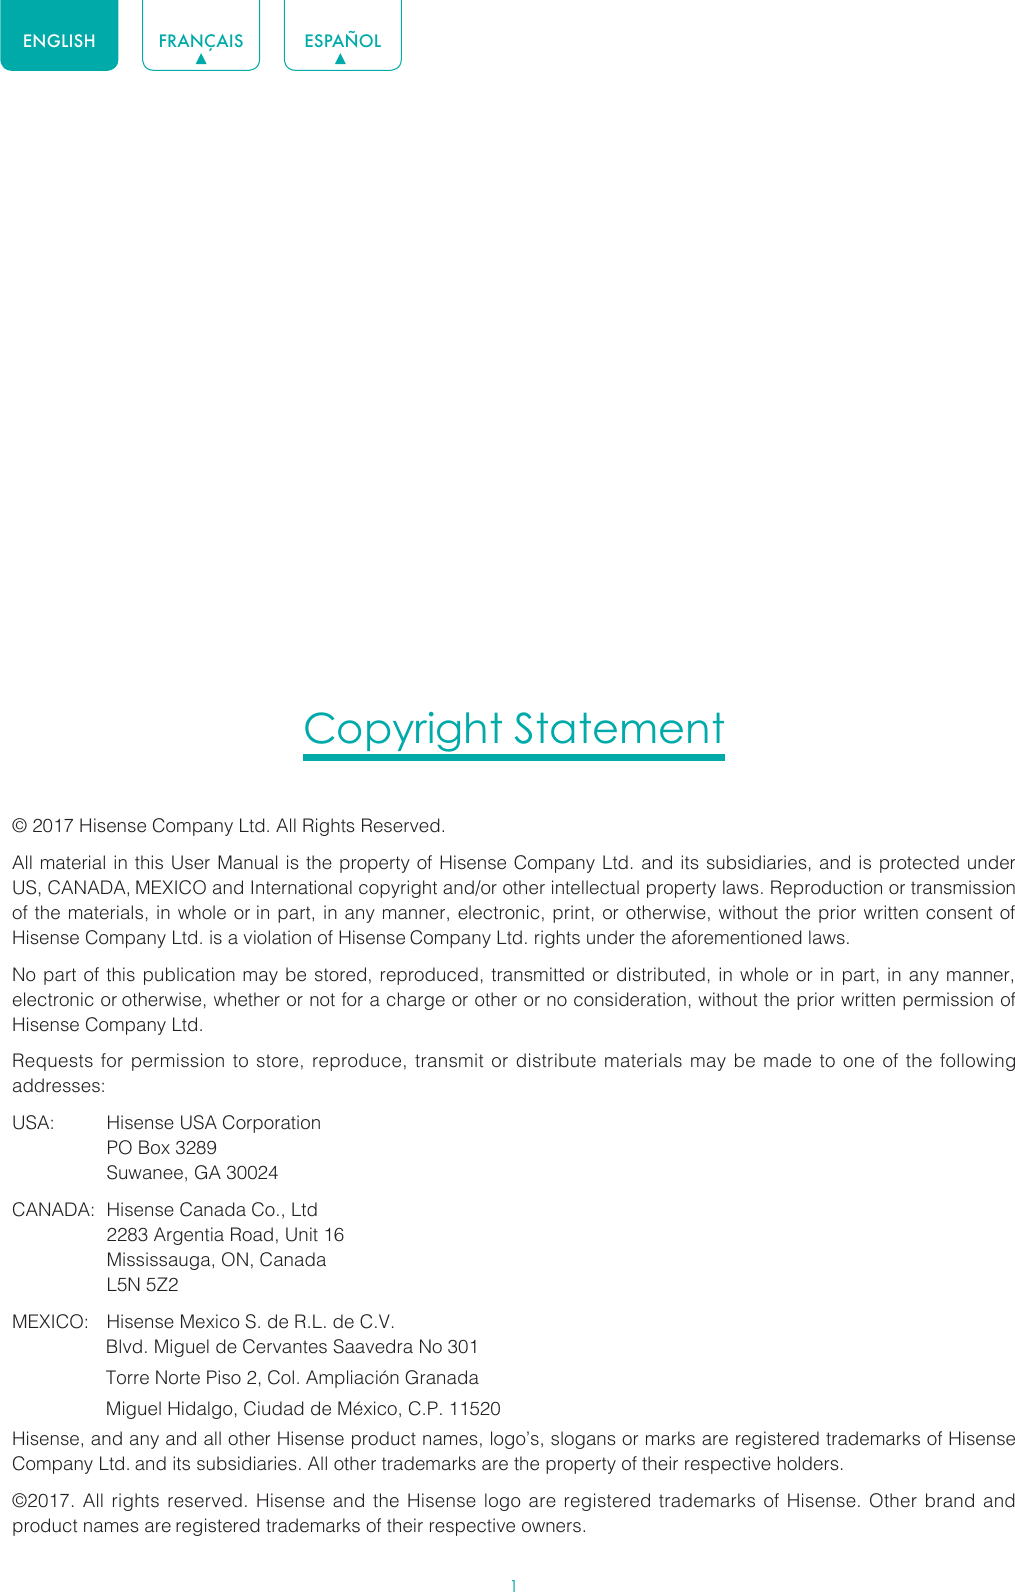 1ENGLISH FRANÇAIS ESPAÑOLCopyright Statement© 2017 Hisense Company Ltd. All Rights Reserved.All material in this User Manual is the property of Hisense Company Ltd. and its subsidiaries, and is protected under US, CANADA, MEXICO and International copyright and/or other intellectual property laws. Reproduction or transmission of the materials, in whole or in part, in any manner, electronic, print, or otherwise, without the prior written consent of Hisense Company Ltd. is a violation of Hisense Company Ltd. rights under the aforementioned laws.No part of this publication may be stored, reproduced, transmitted or distributed, in whole or in part, in any manner, electronic or otherwise, whether or not for a charge or other or no consideration, without the prior written permission of Hisense Company Ltd.Requests for permission to store, reproduce, transmit or distribute materials may be made to one of the following addresses:USA:  Hisense USA Corporation  PO Box 3289  Suwanee, GA 30024CANADA:  Hisense Canada Co., Ltd  2283 Argentia Road, Unit 16  Mississauga, ON, Canada  L5N 5Z2MEXICO:  Hisense Mexico S. de R.L. de C.V.                  Blvd. Miguel de Cervantes Saavedra No 301                  Torre Norte Piso 2, Col. Ampliación Granada                  Miguel Hidalgo, Ciudad de México, C.P. 11520Hisense, and any and all other Hisense product names, logo’s, slogans or marks are registered trademarks of Hisense Company Ltd. and its subsidiaries. All other trademarks are the property of their respective holders.©2017. All rights reserved. Hisense and the Hisense logo are registered trademarks of Hisense. Other brand and product names are registered trademarks of their respective owners.